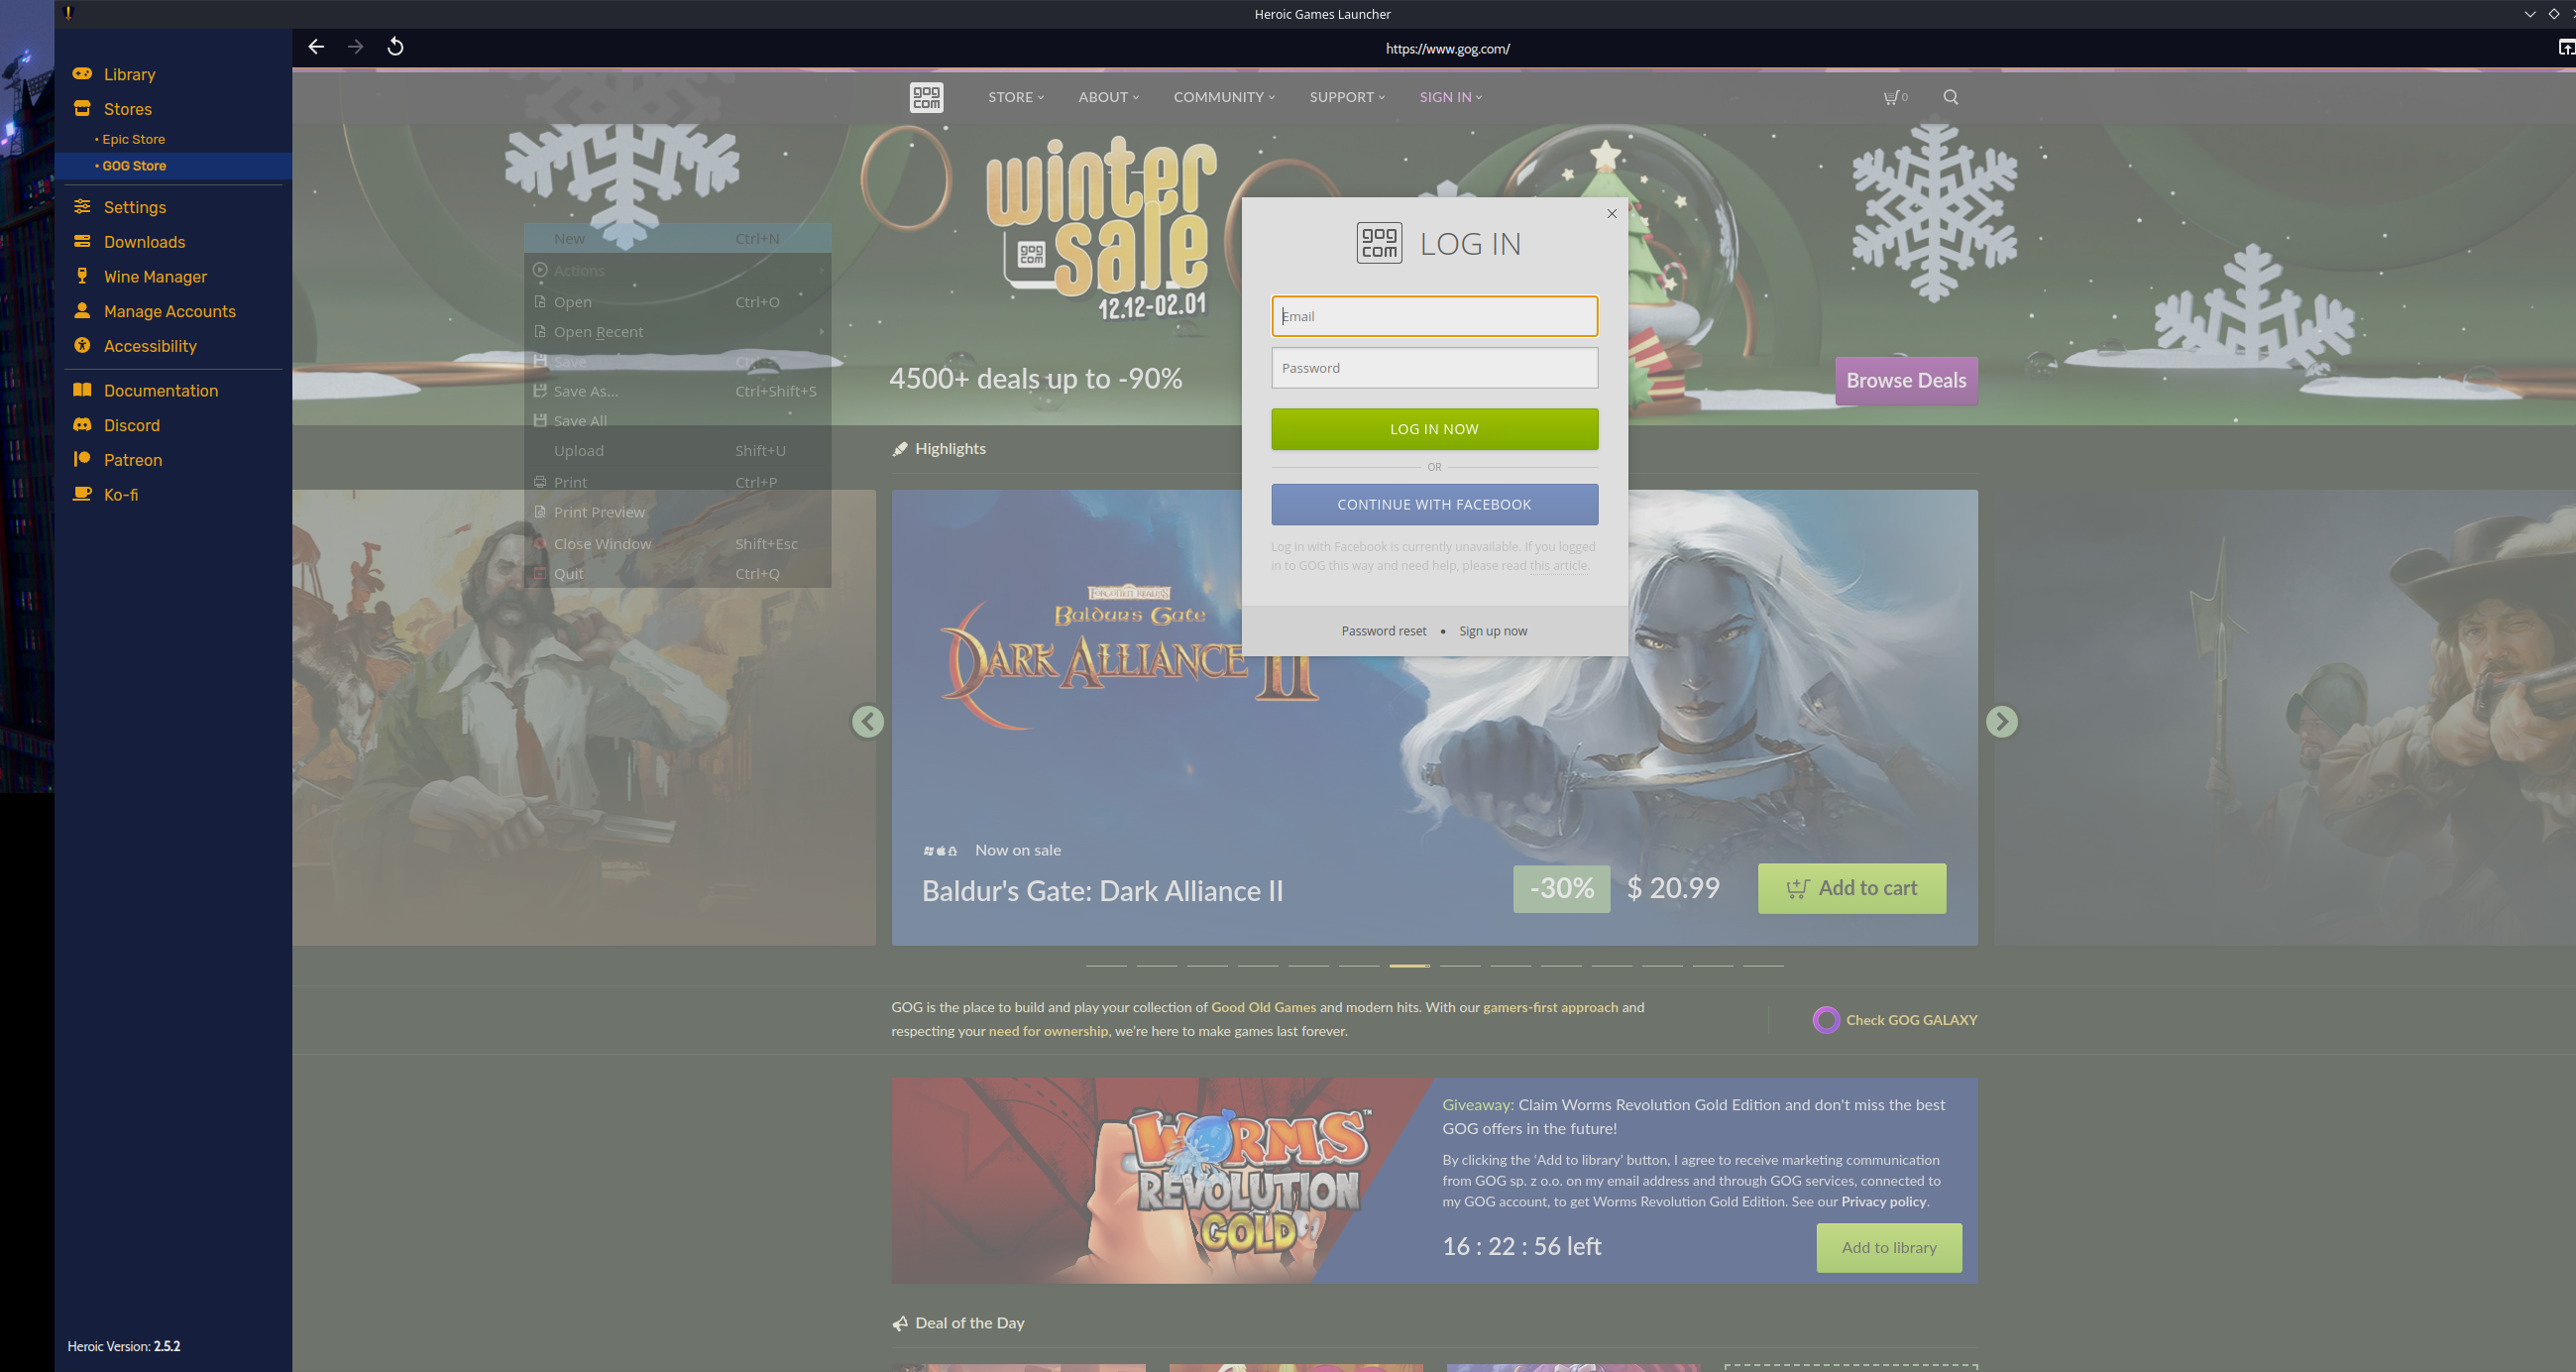 How to install Epic Games Store on Steam Deck  Heroic Games Launcher  #steamdeck #epicgamesstore 